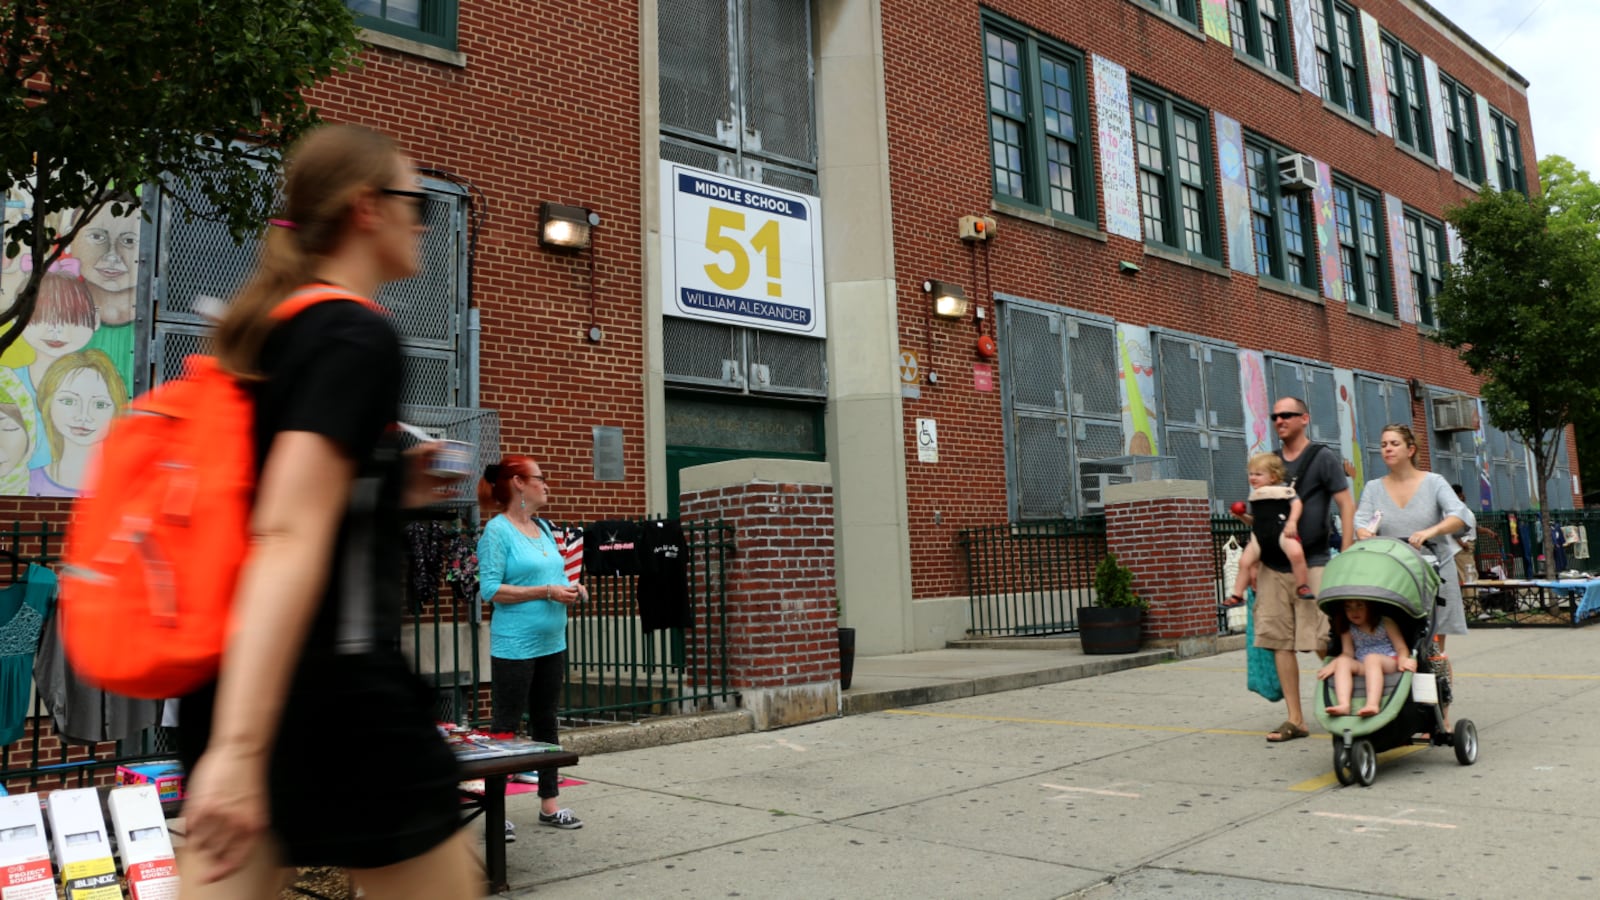 M.S. 51 in Park Slope is one of the most coveted schools in District 15, and it stands to potentially change its student body dramatically with a new integration plan in place.